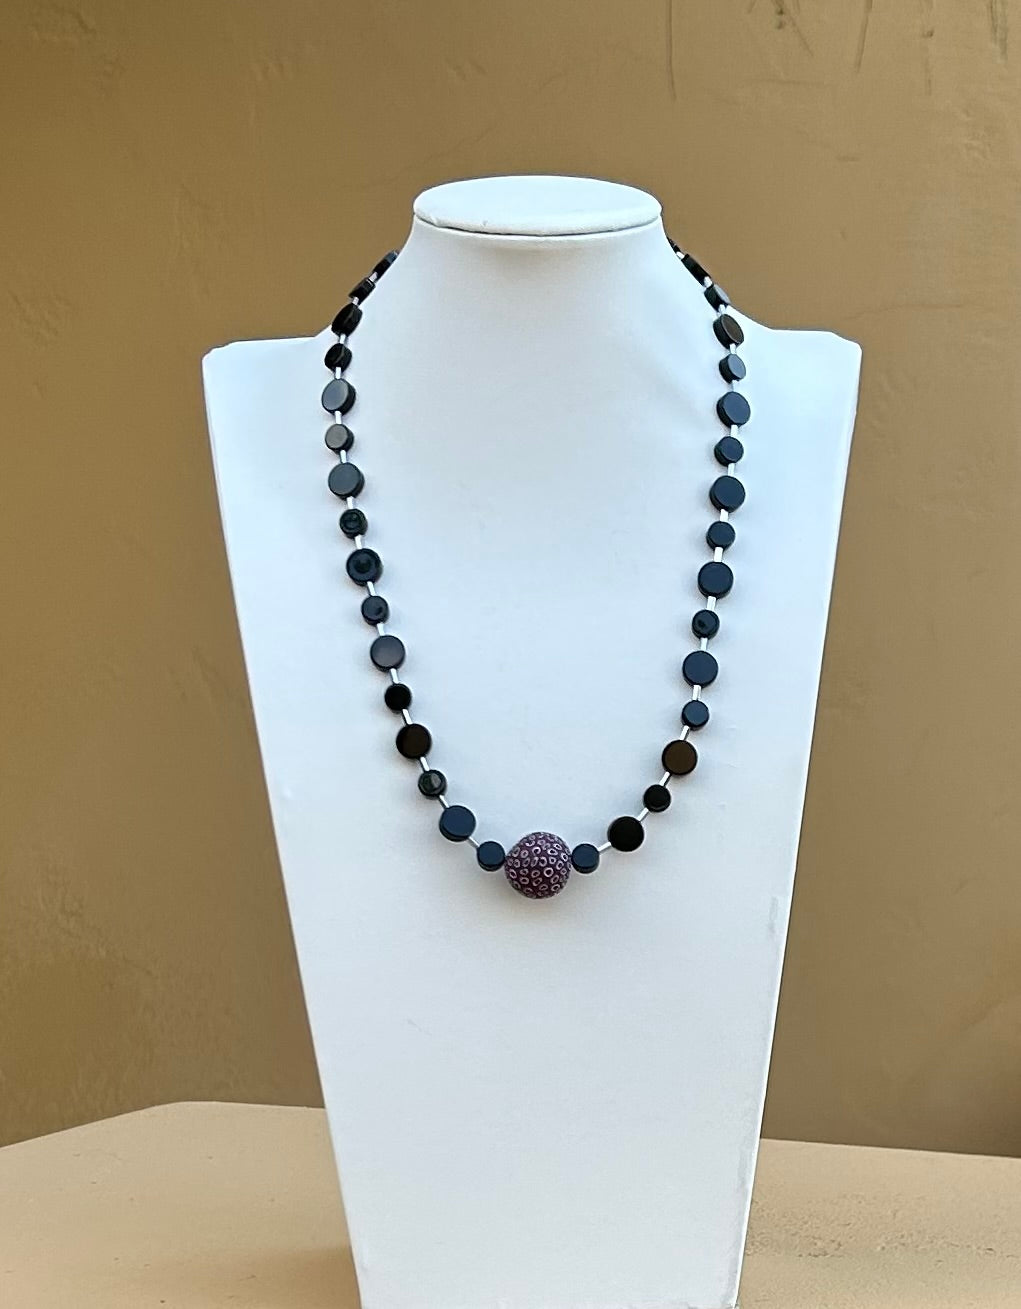 Necklace - Black onyx with silver hematite spacers and a dark red white and grey clay bead